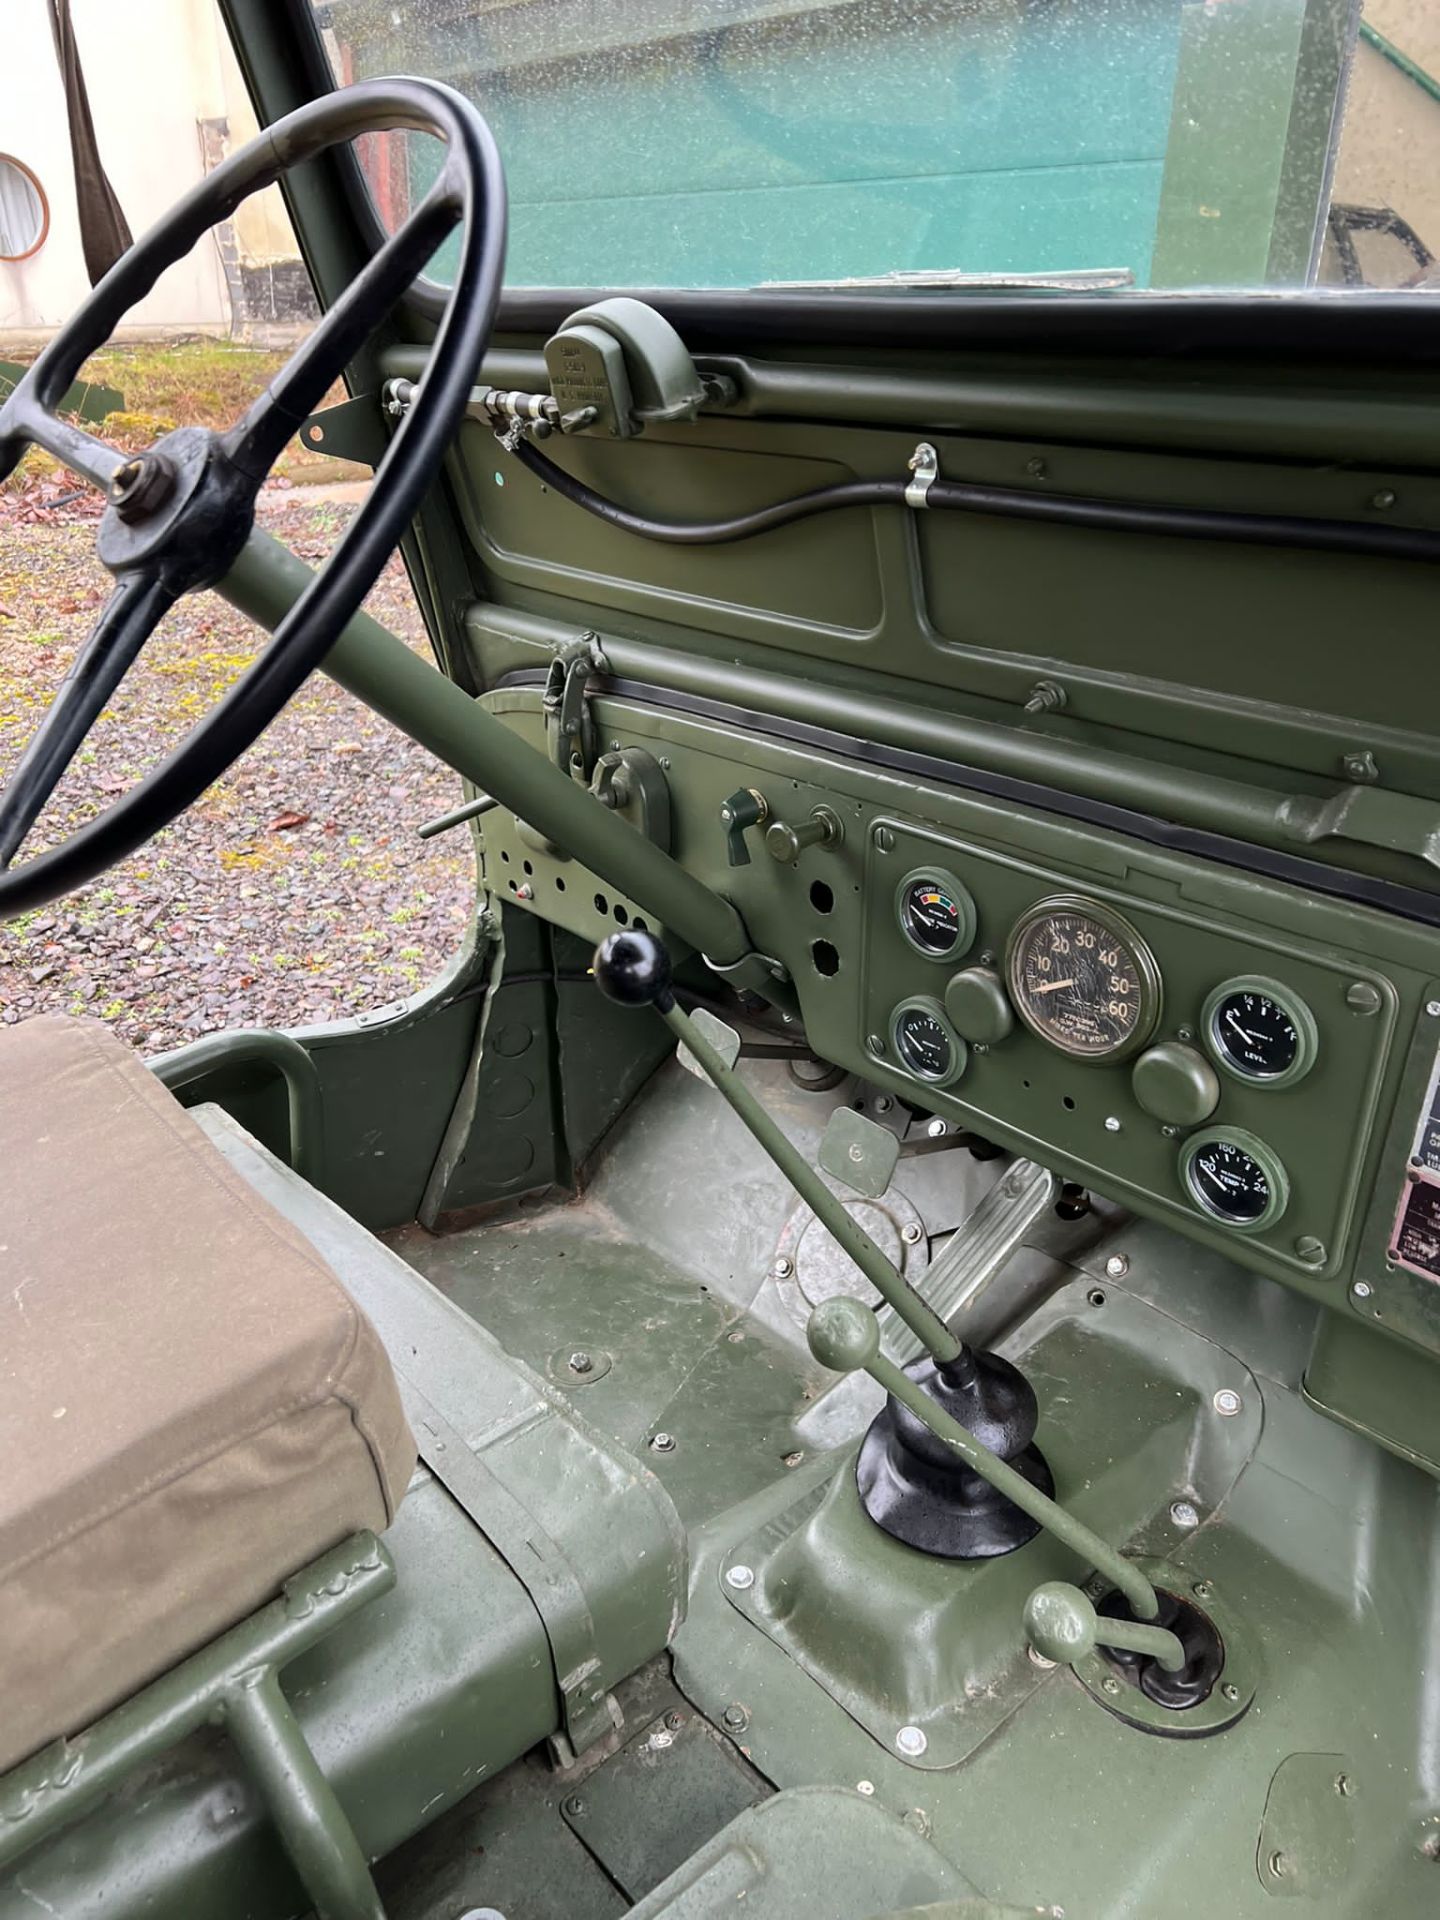 Willys Jeep Model M38 c1947 - Image 11 of 13